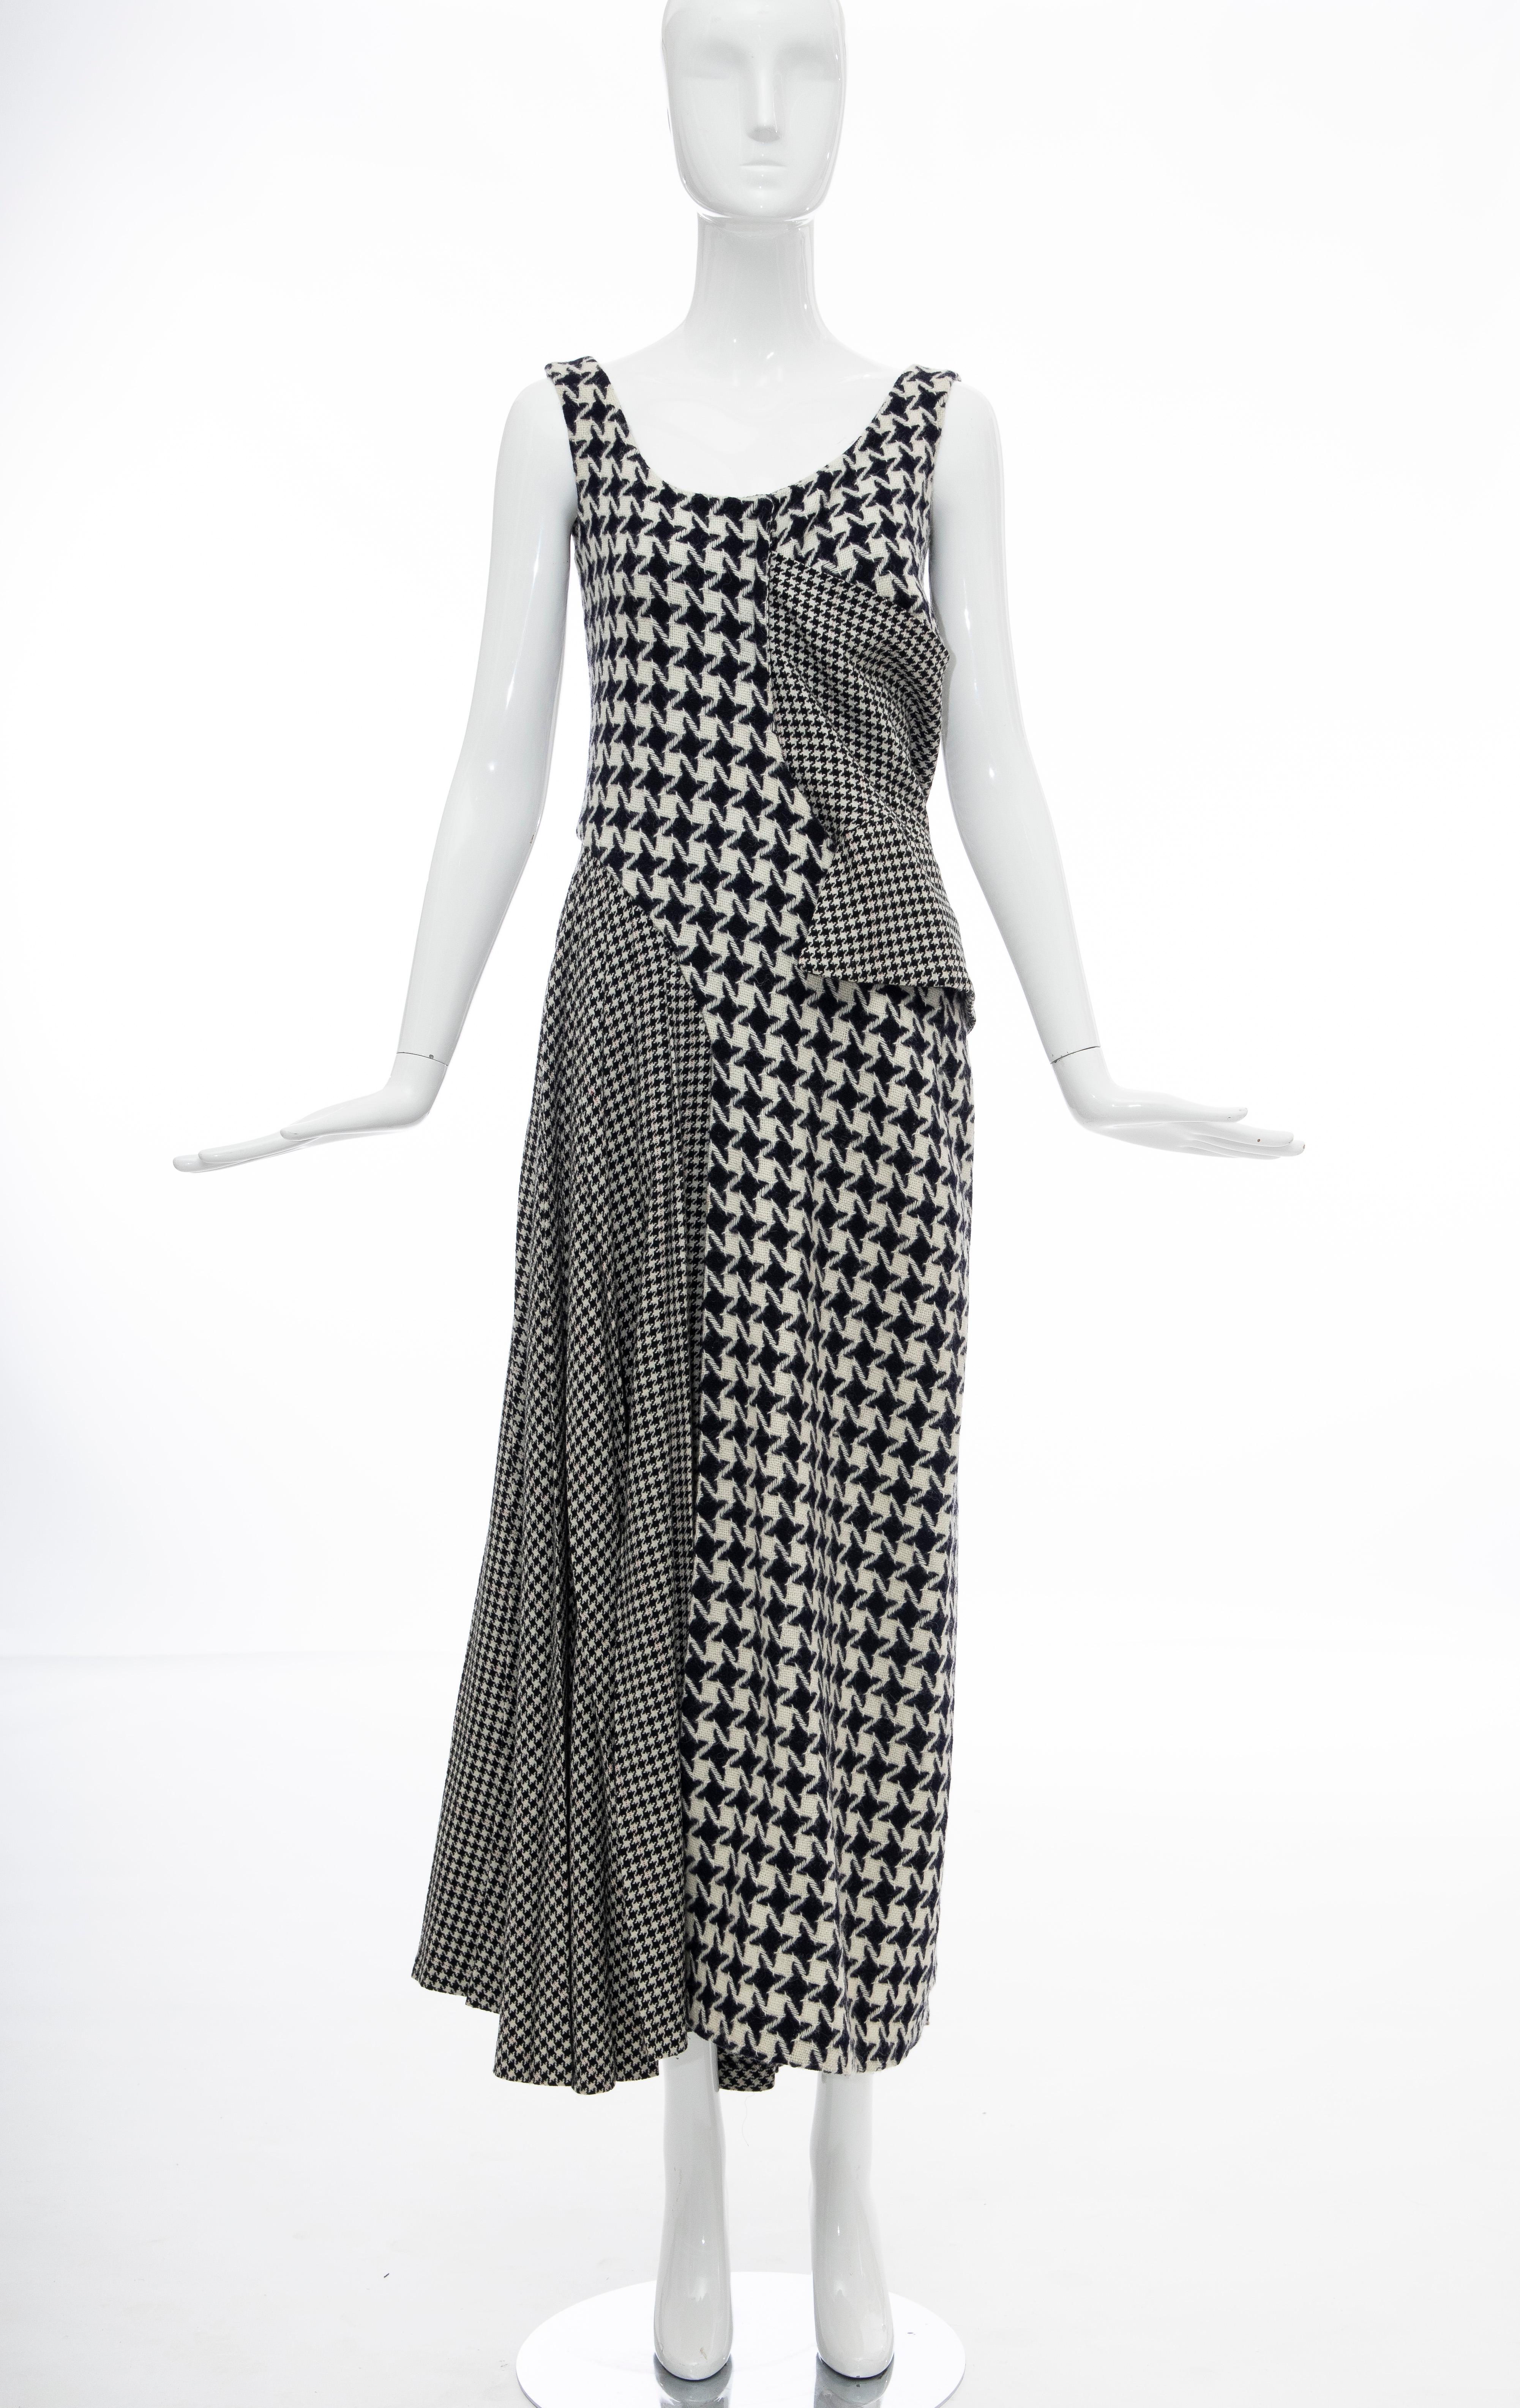 Yohji Yamamoto Runway Wool Navy Black Houndstooth Sleeveless Dress, Fall 2003 In Excellent Condition For Sale In Cincinnati, OH